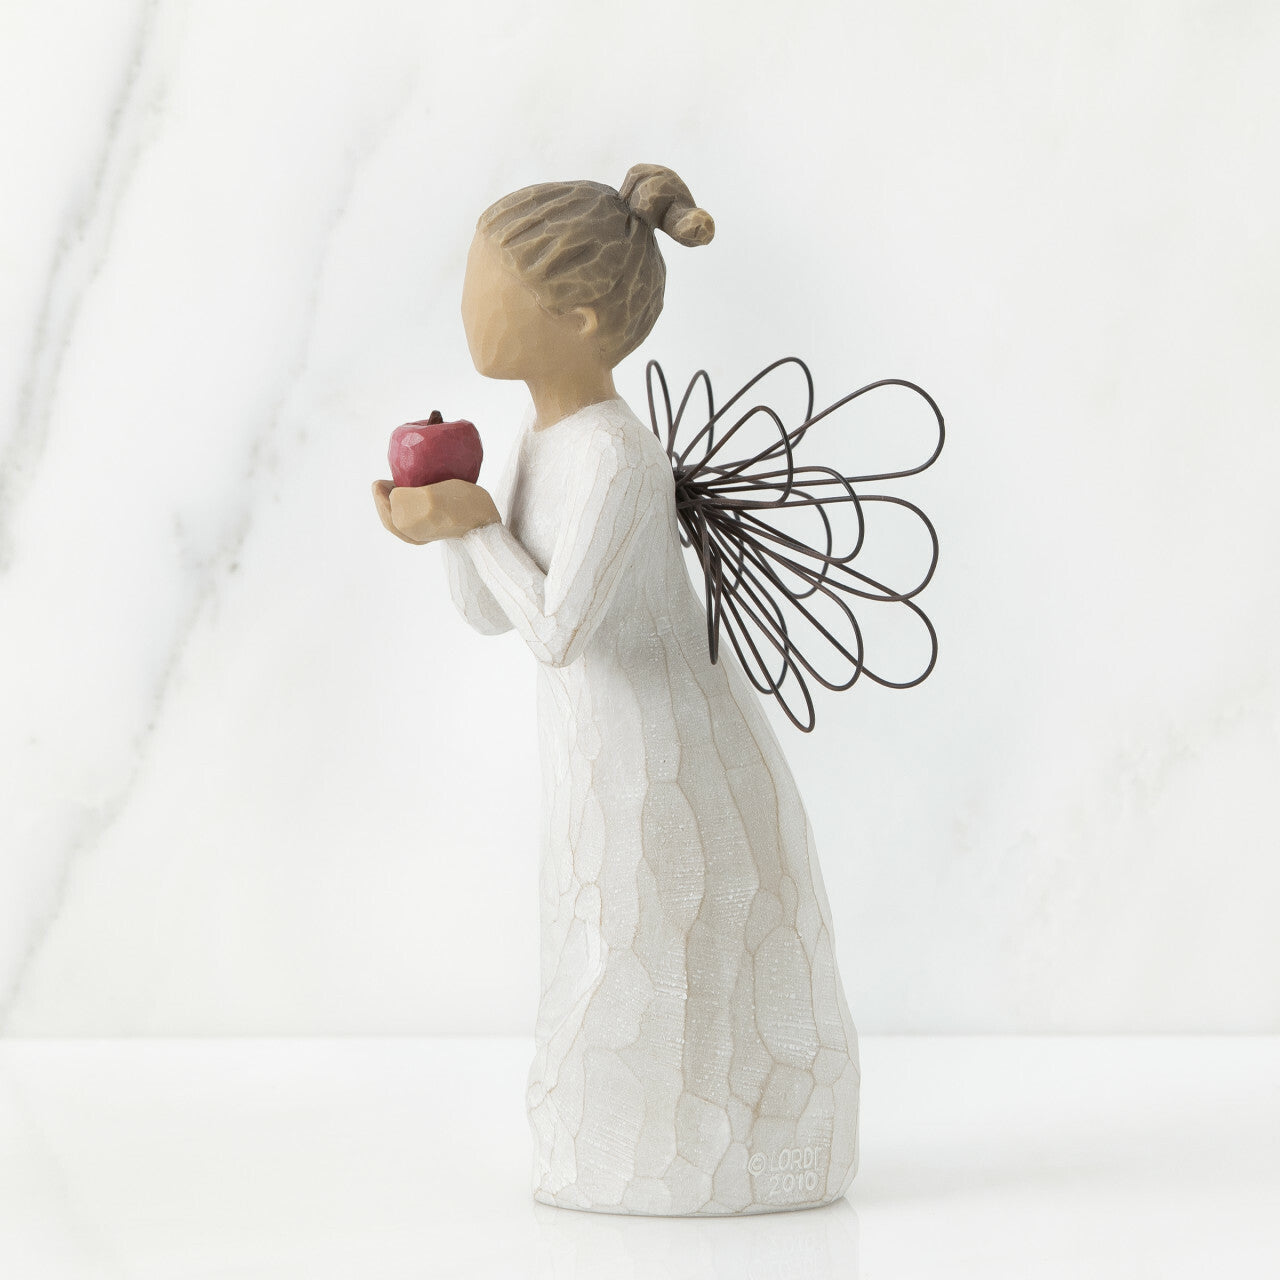 Willow Tree You're The Best Angel Figurine